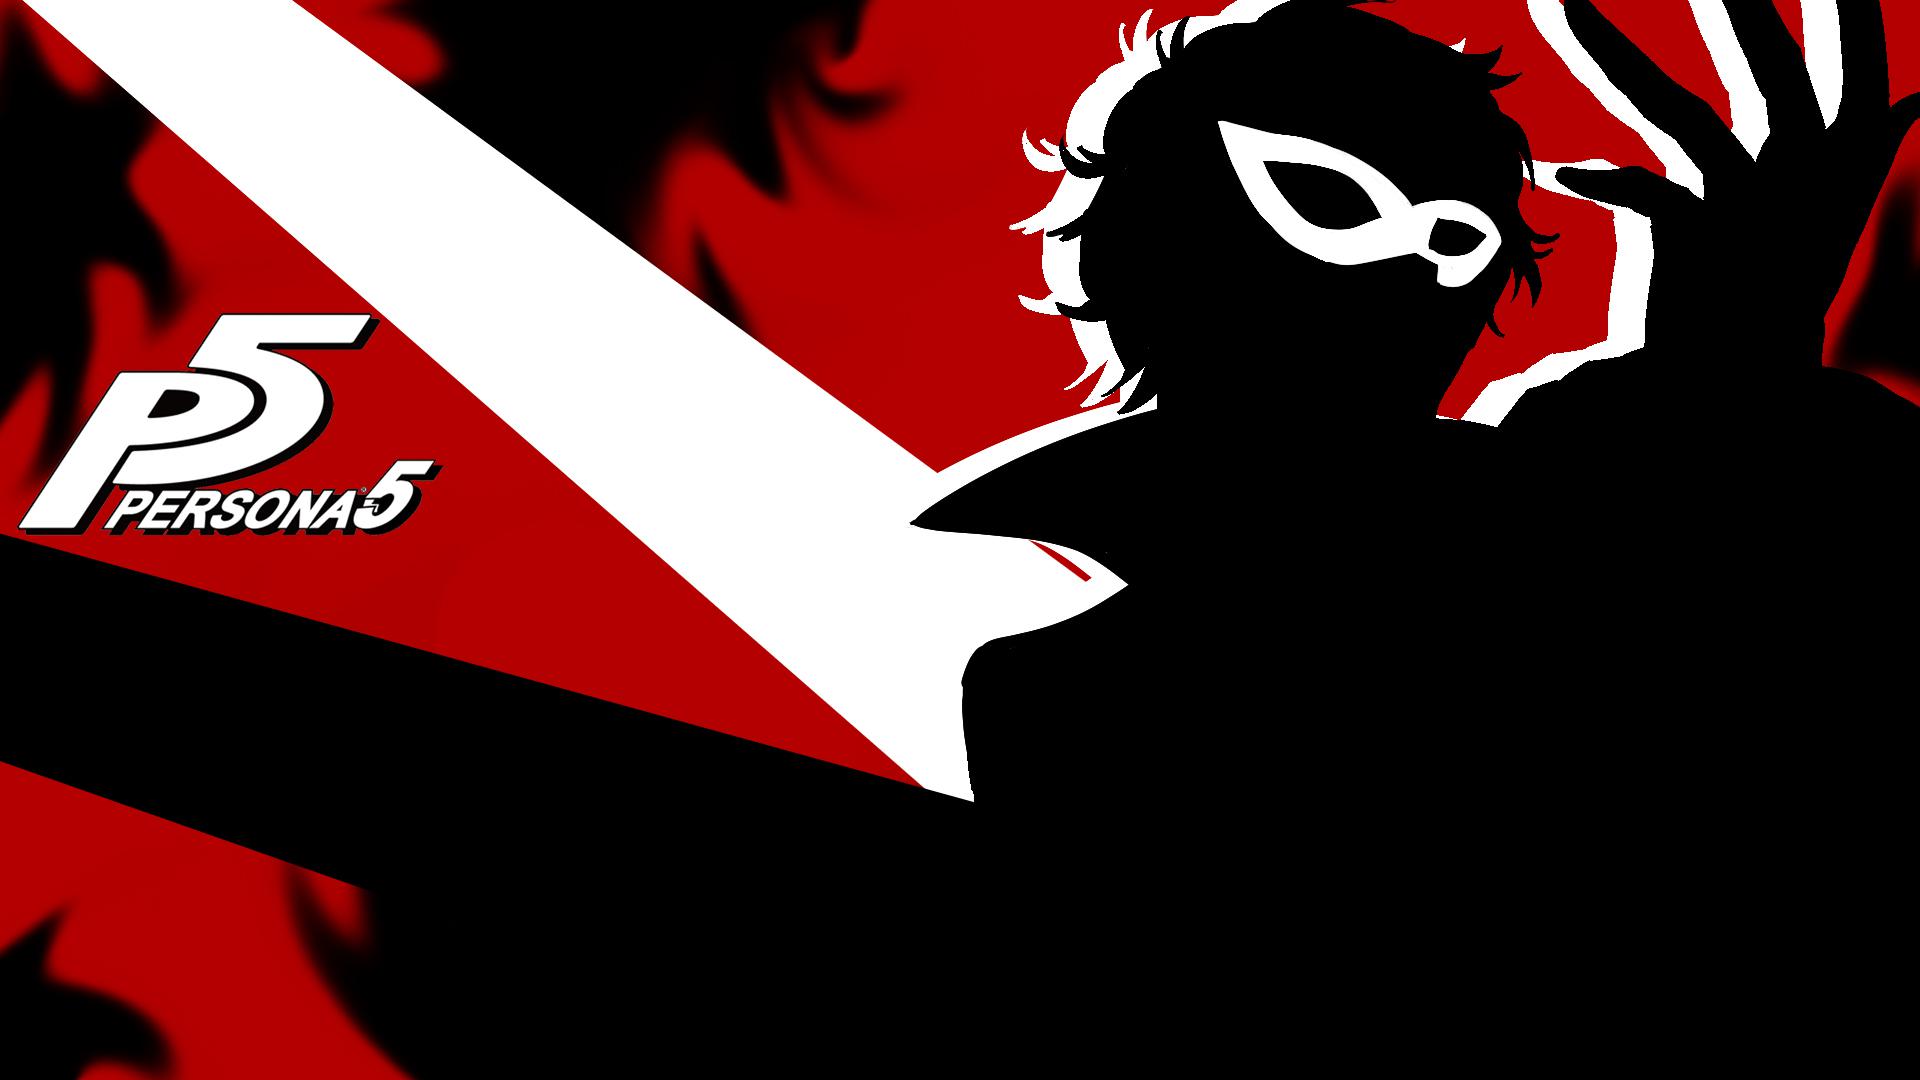 Persona 5 wallpaper I made for my desktop, feel free to use it